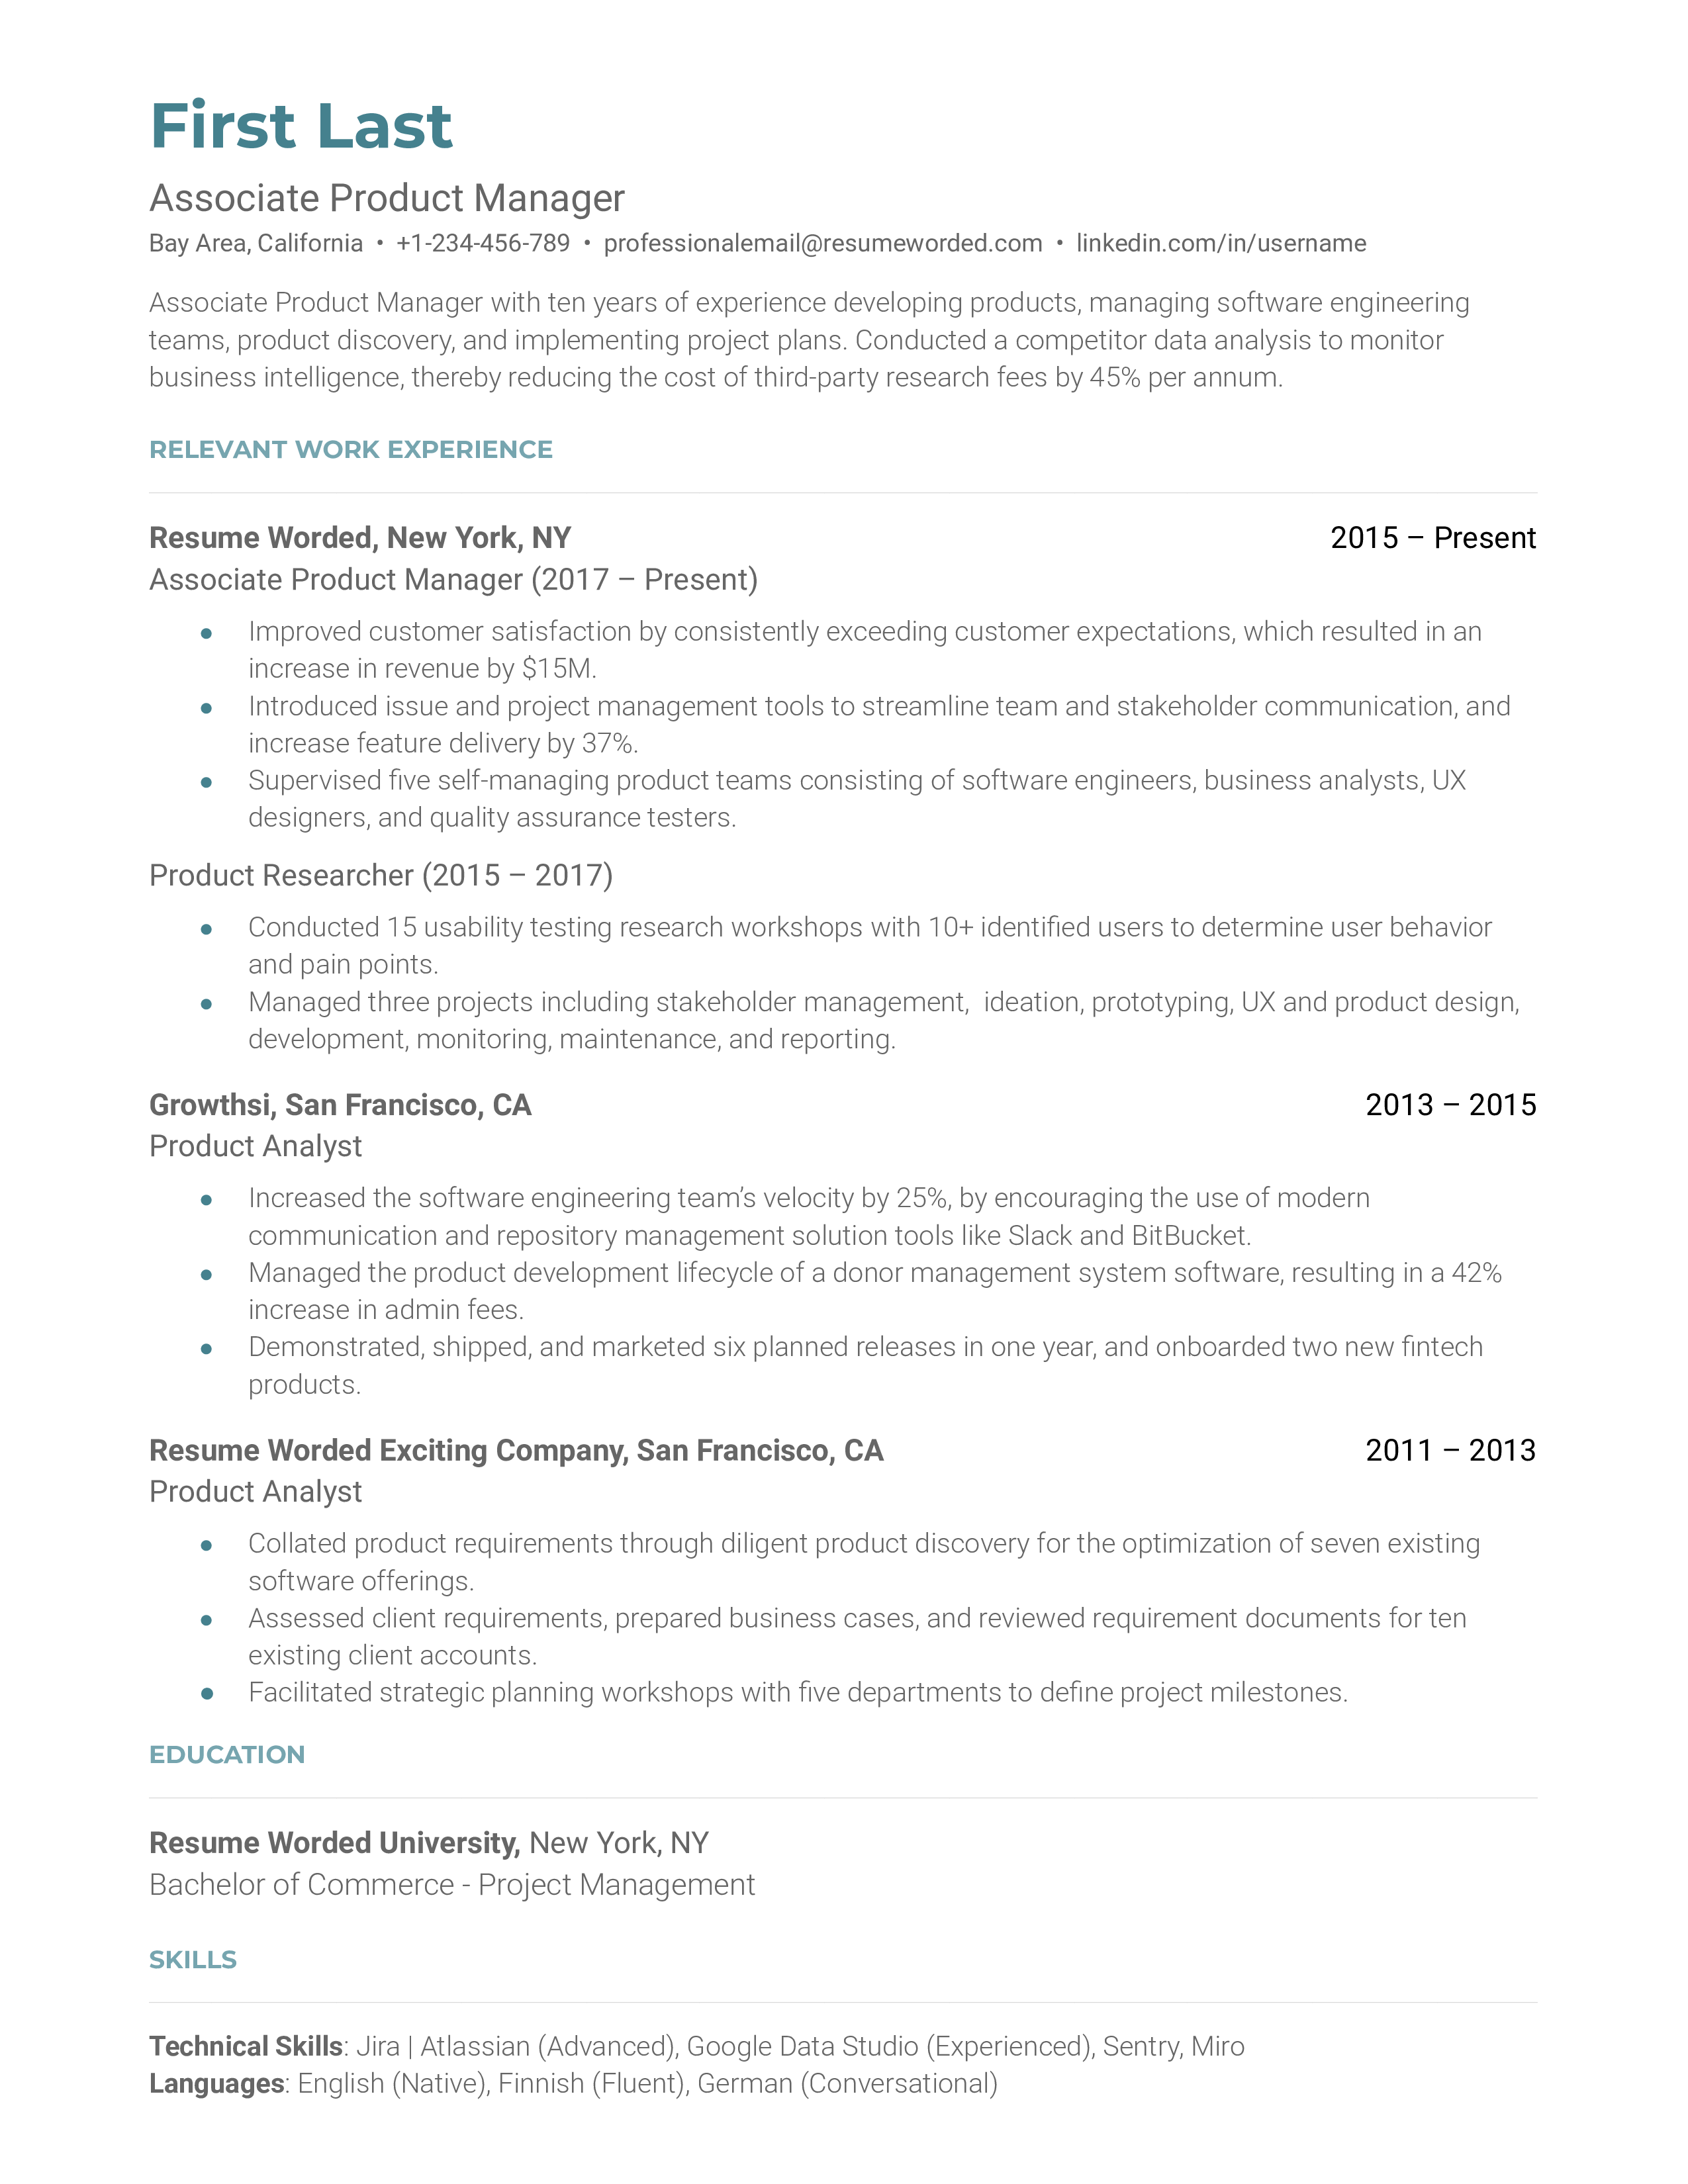 Associate Product Manager Resume Sample